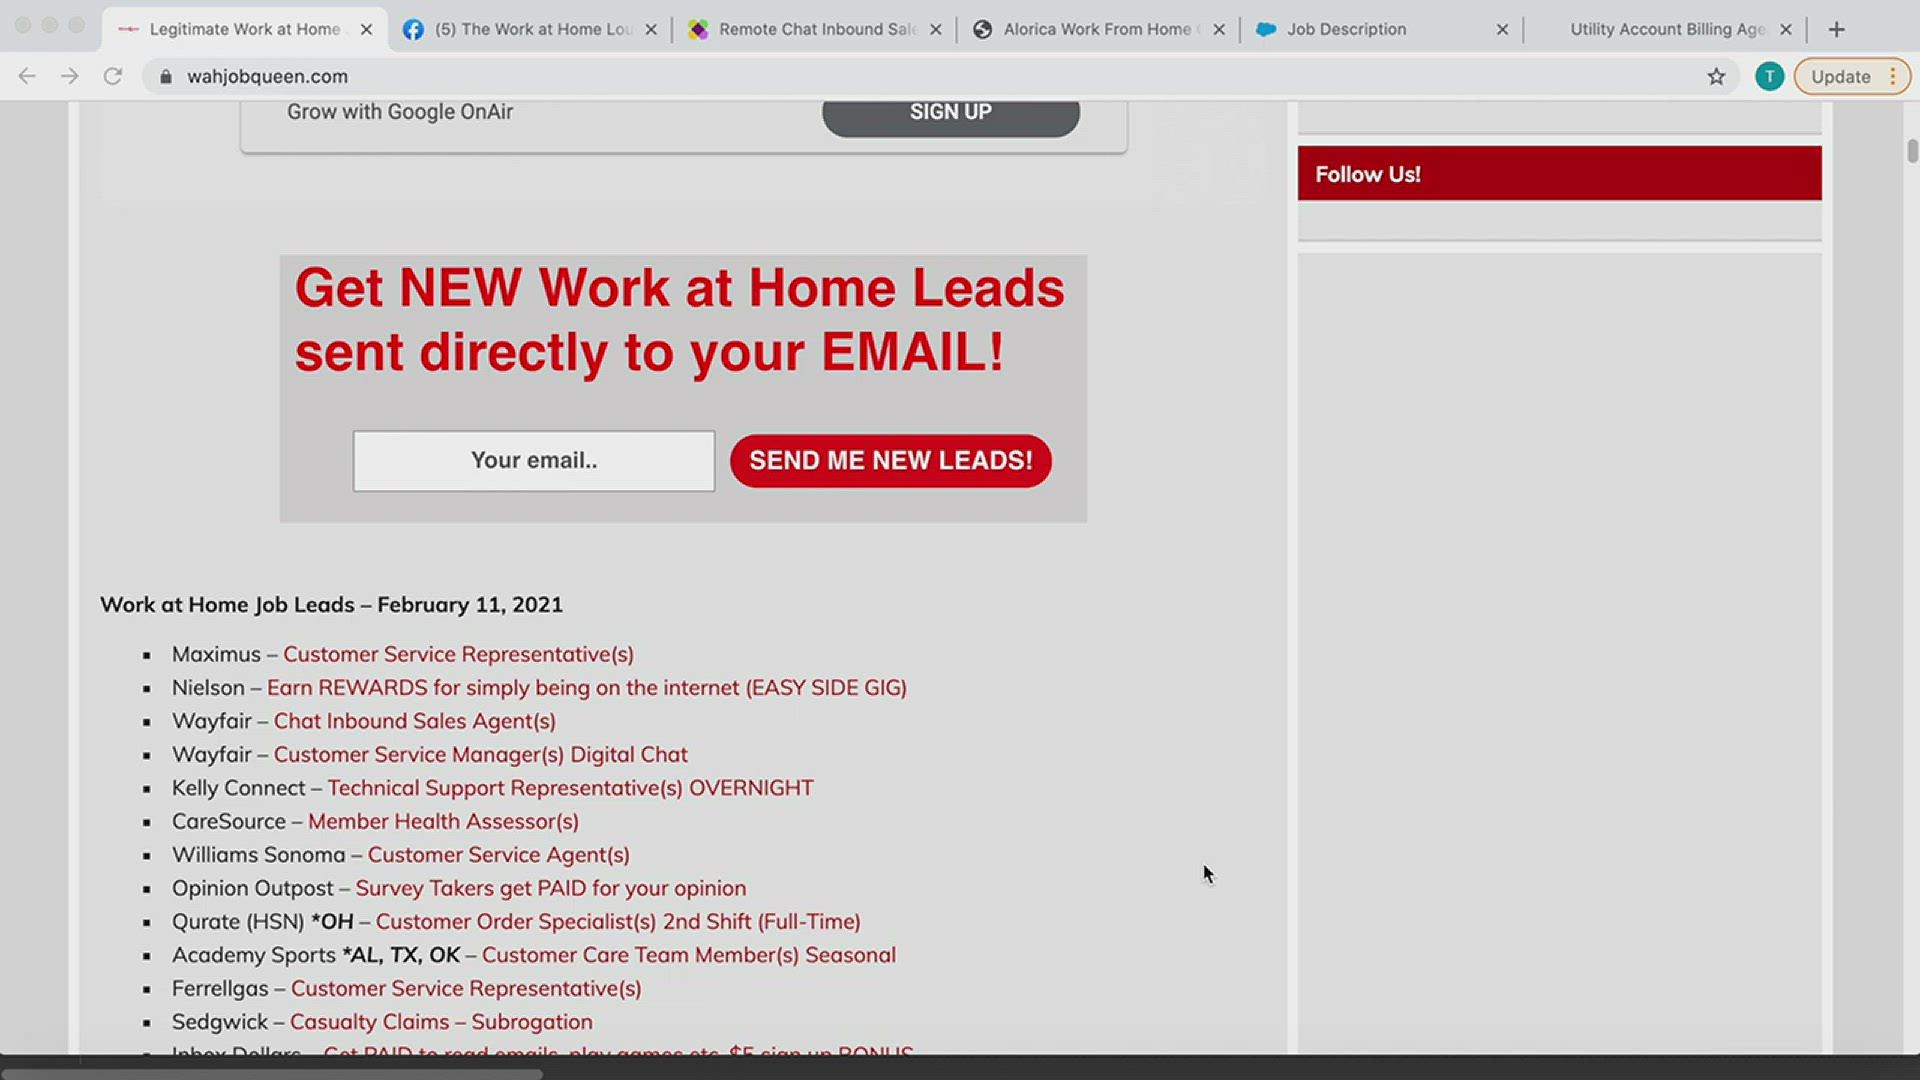 Brand new work from home jobs posted today for Customer Support